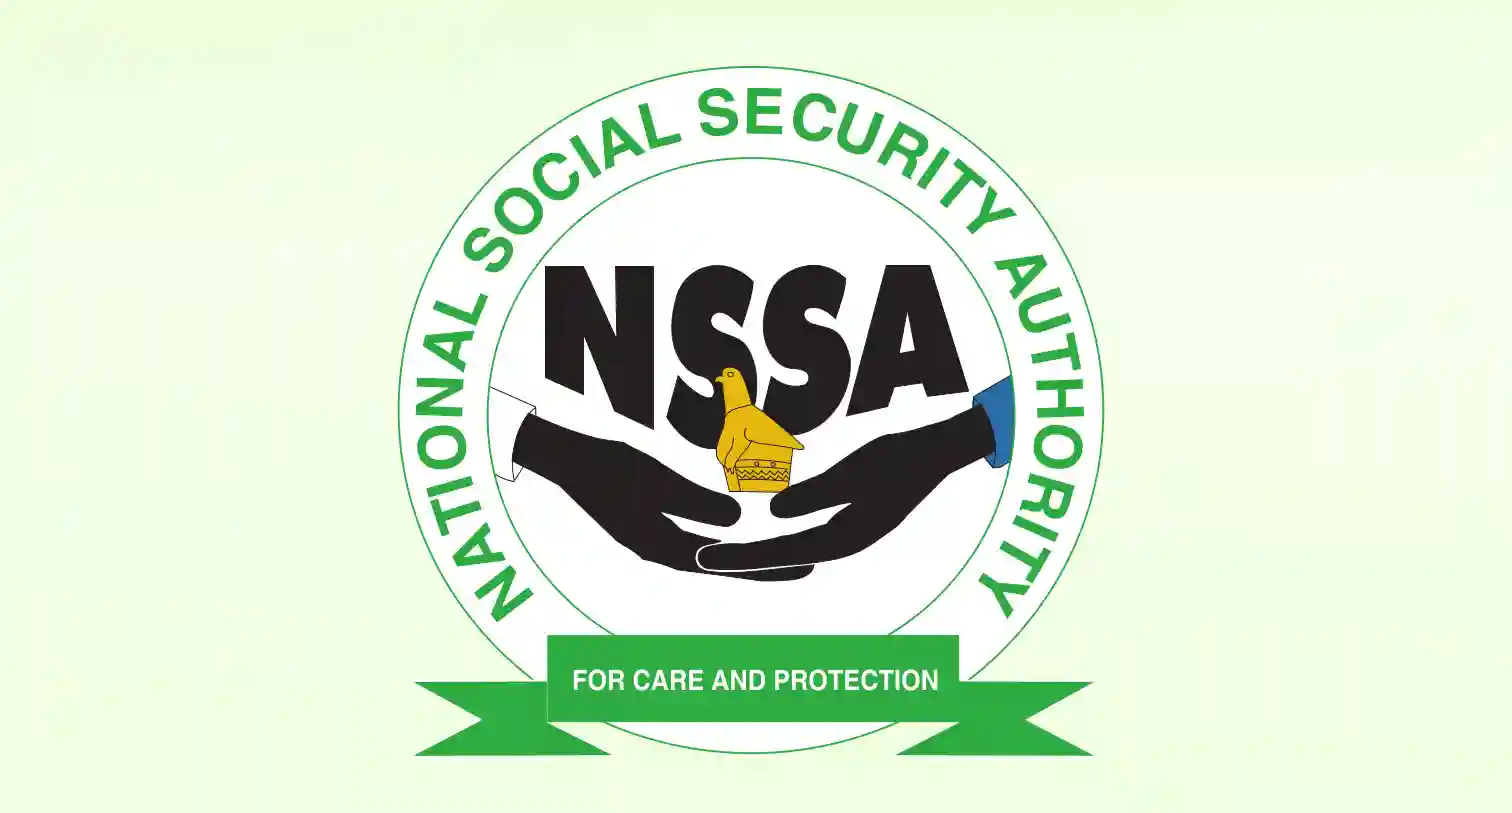 NSSA Increases Pension Contributions From 7% To 9%